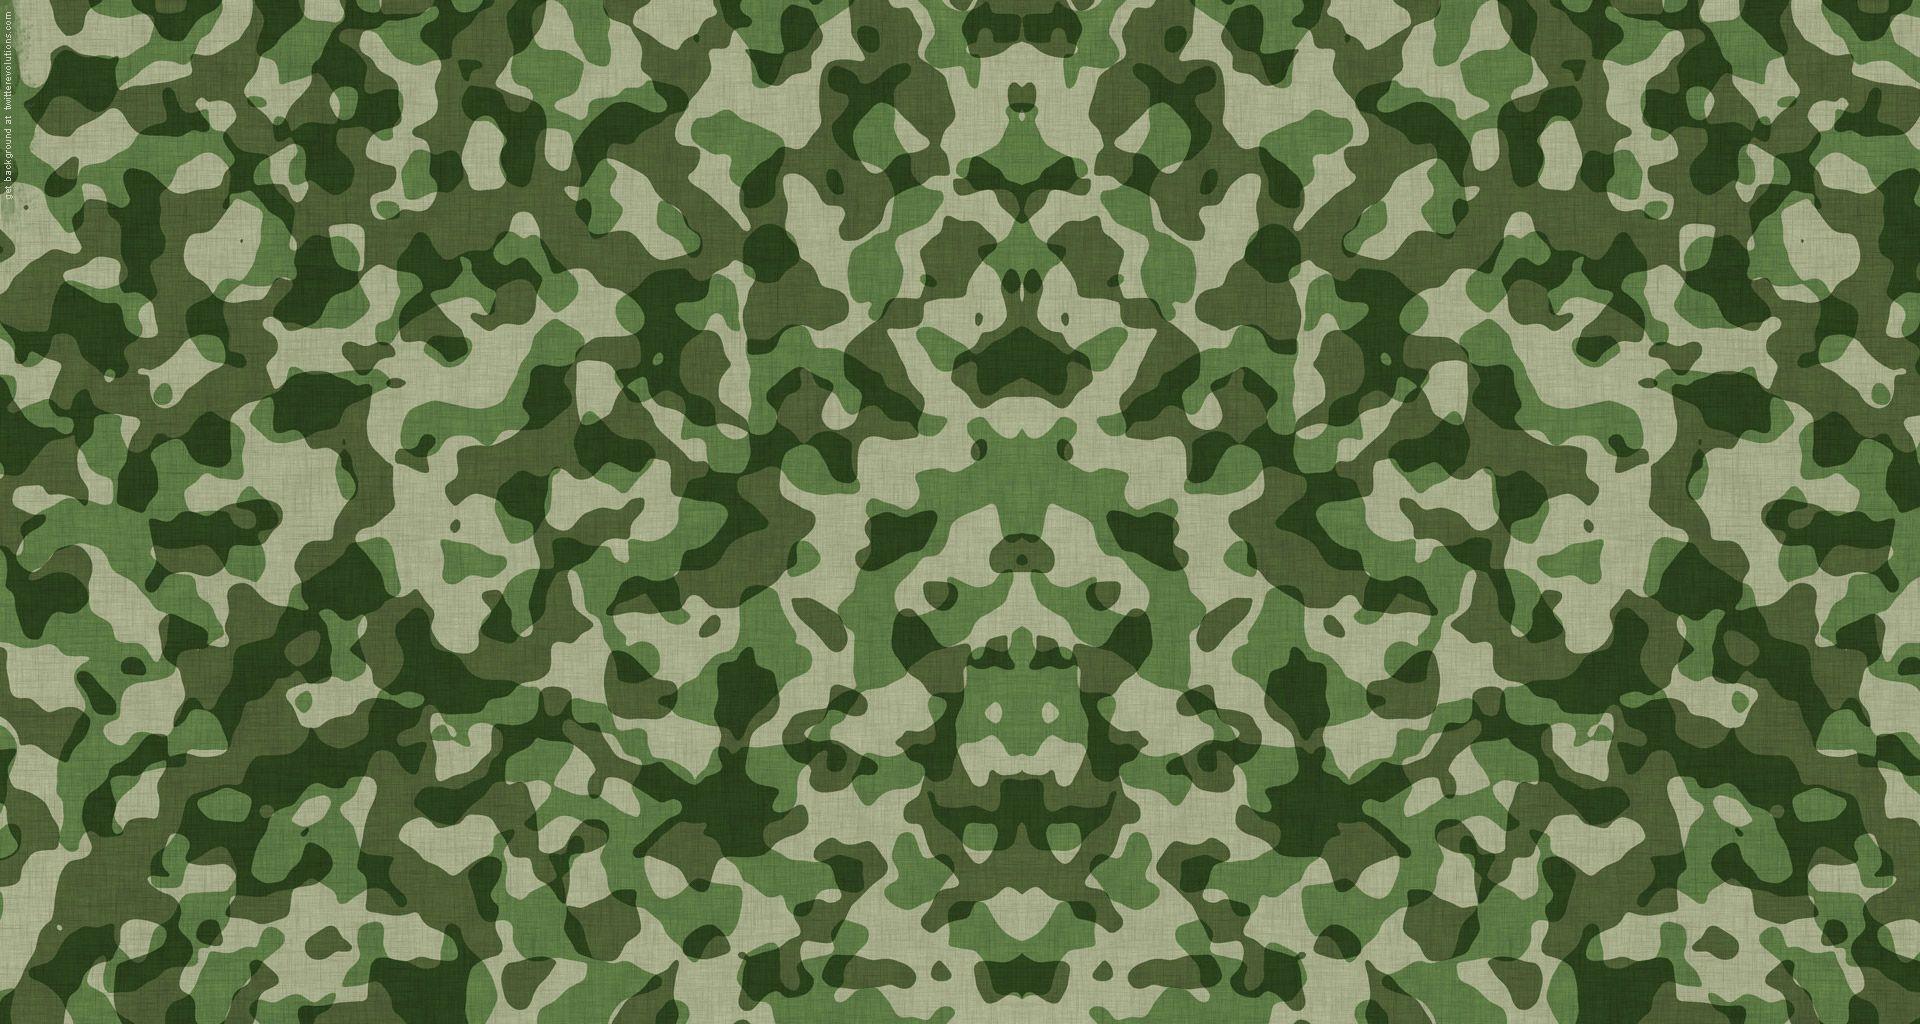 Military Camouflage Background